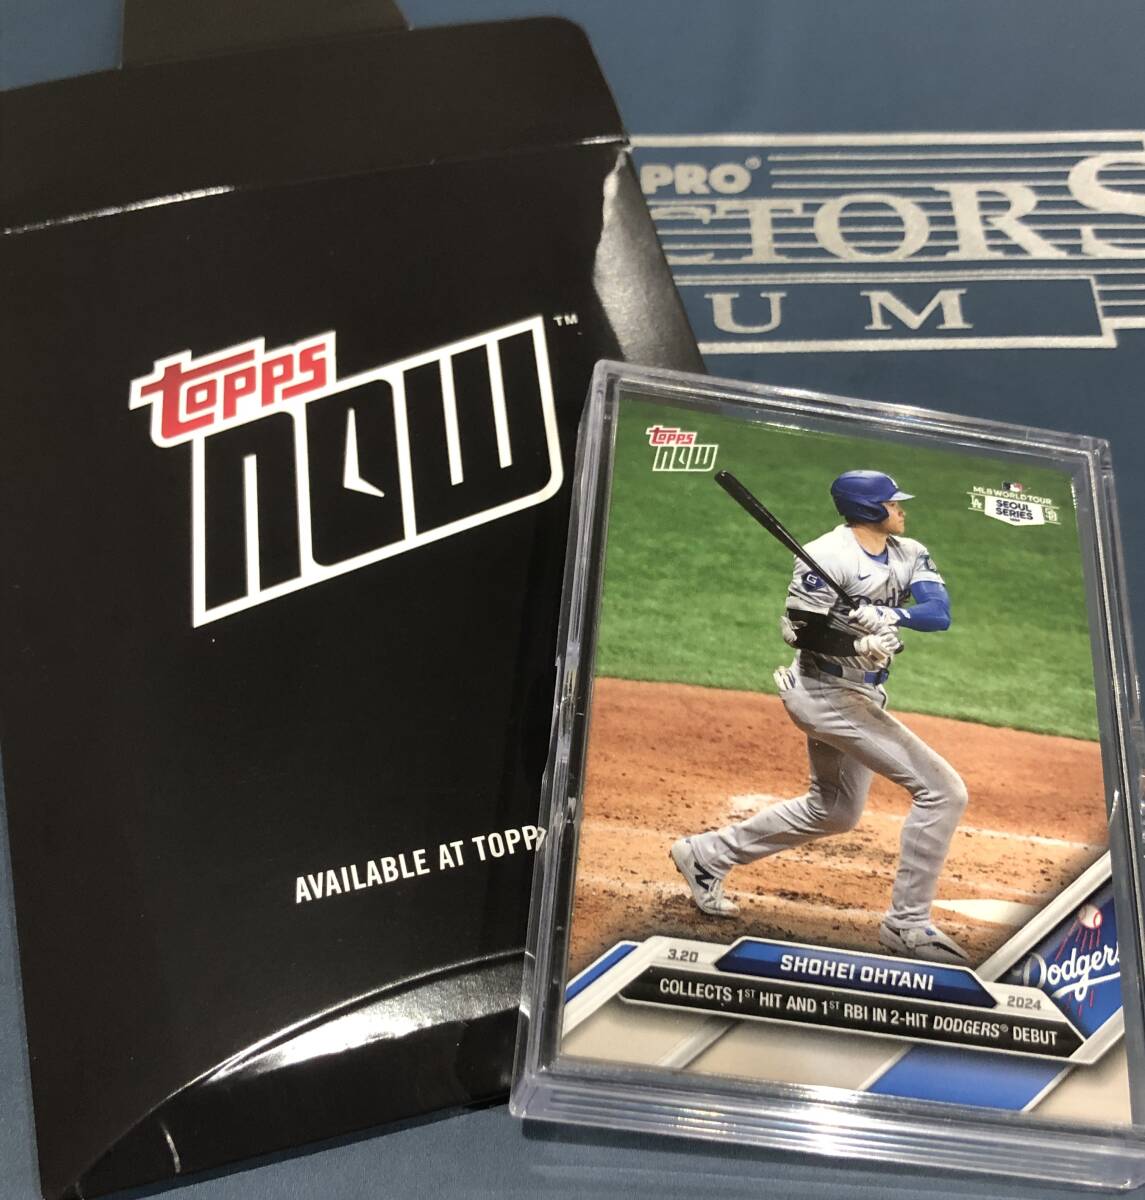 2024 MLB TOPPS NOW 大谷翔平 COLLECTS 1st HIT AND 1st RBI IN 2HIT DODGERS DEBUT ドジャースデビュー 開幕戦 カード  20枚セット の画像1